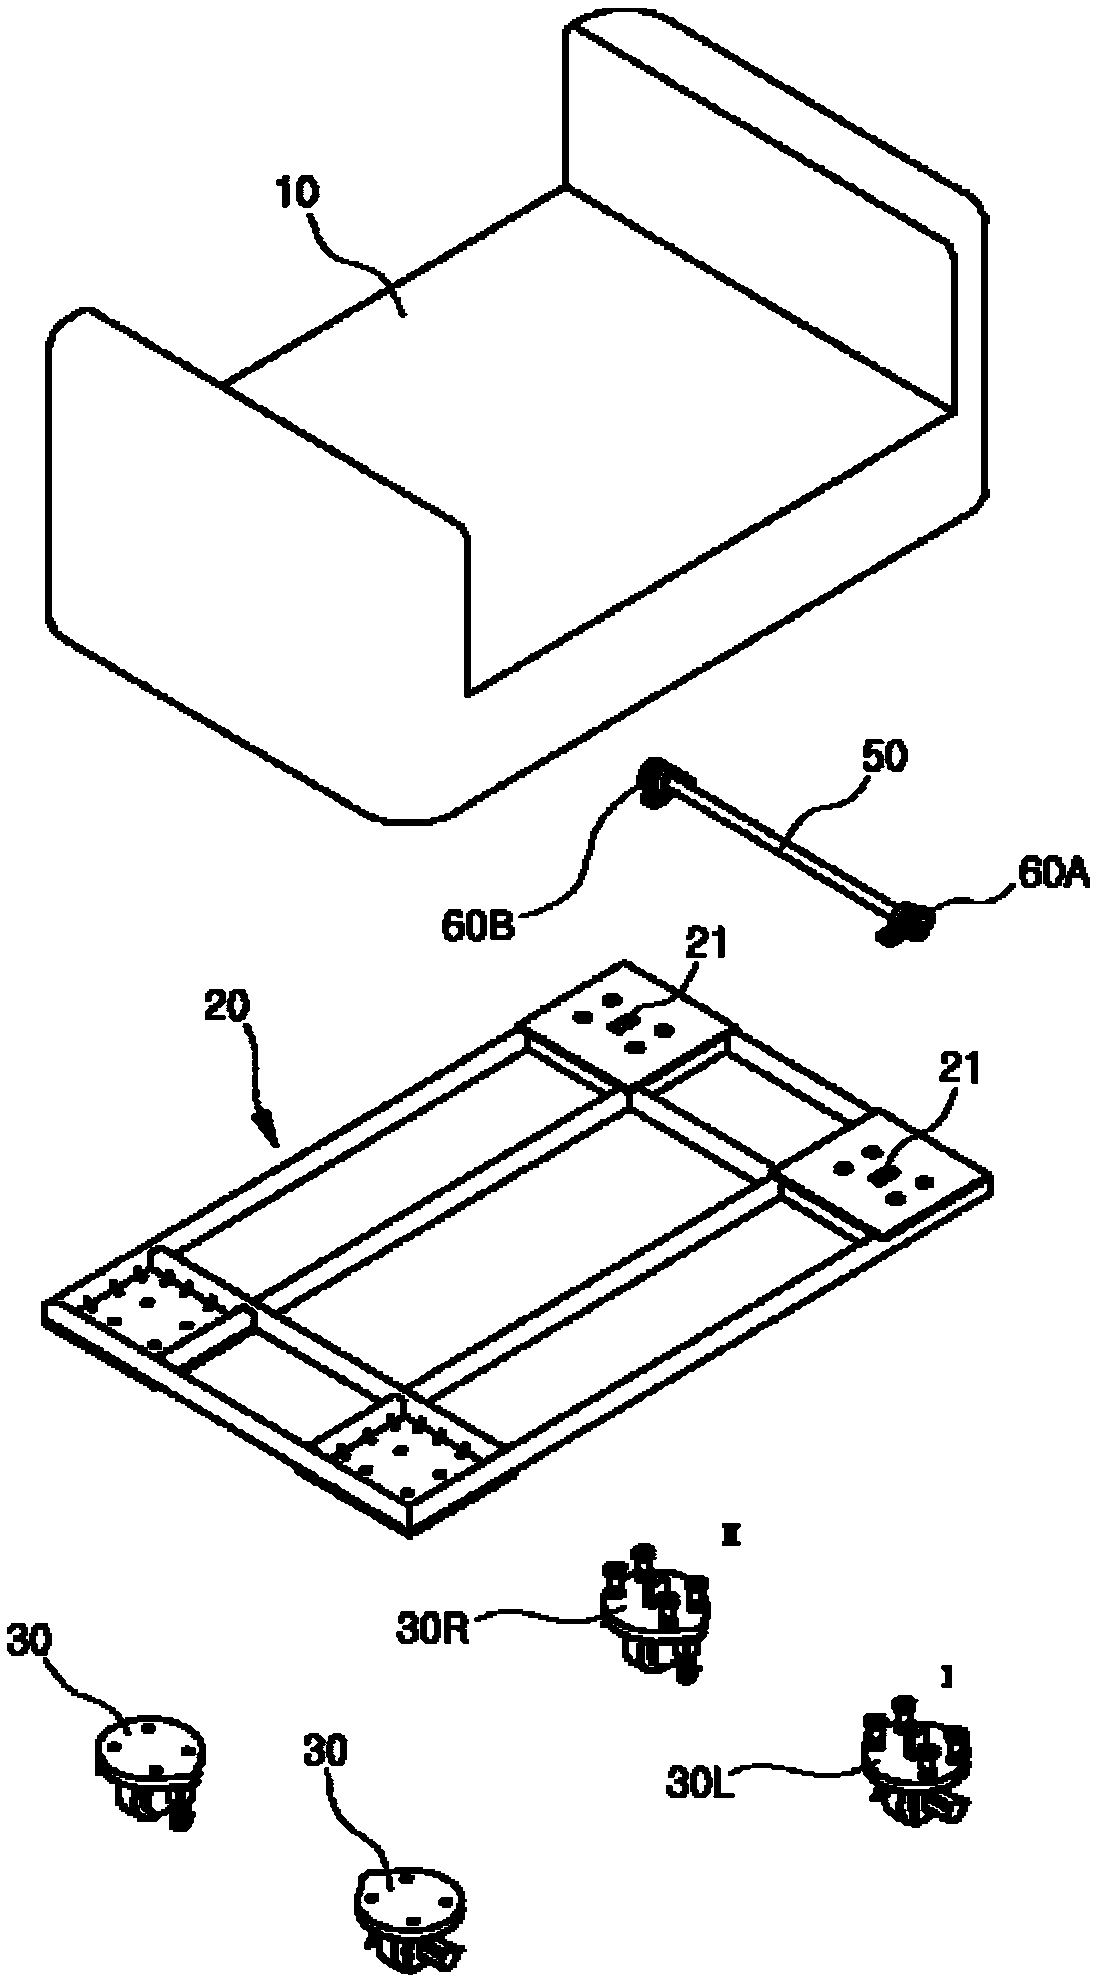 Non-elastic suspension frame structure of automatic guiding vehicle